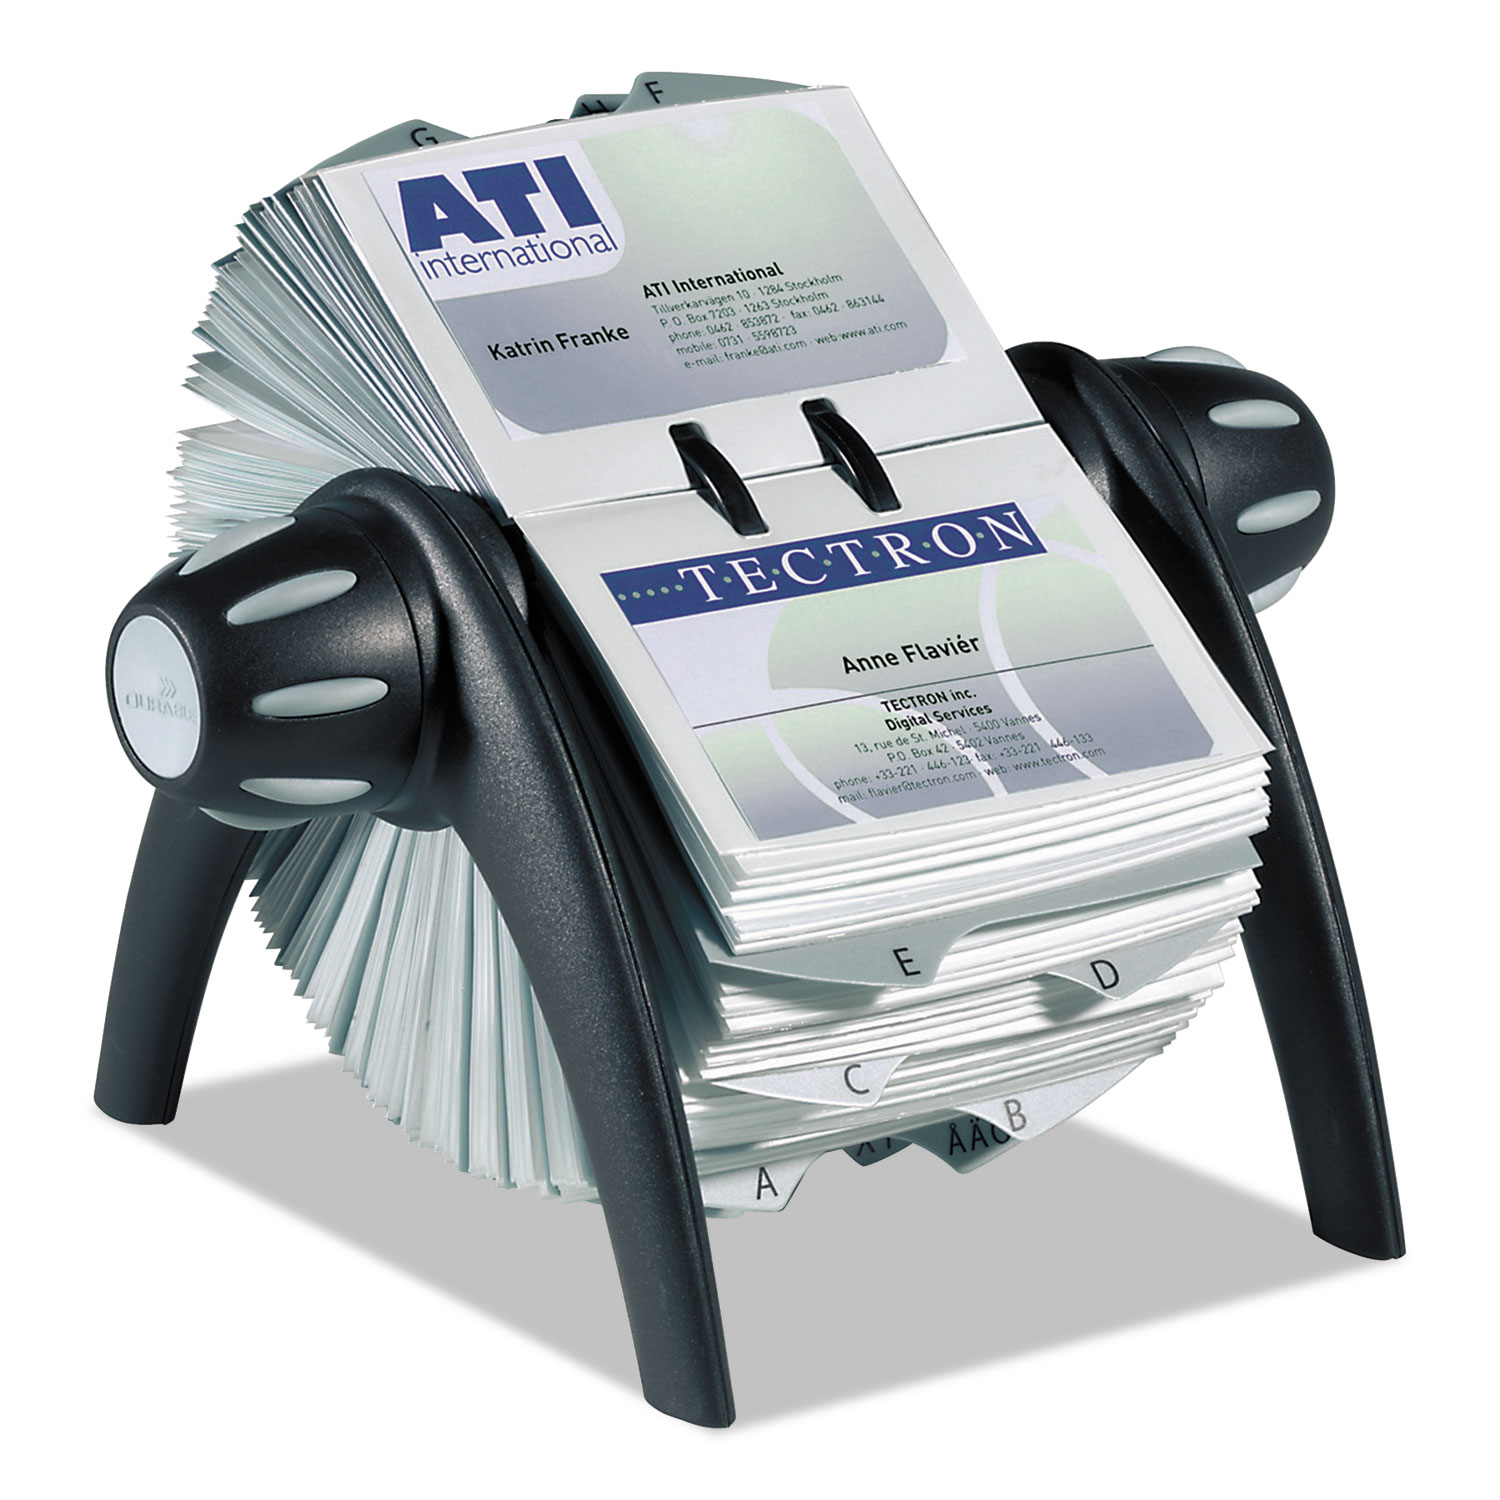 VISIFIX Flip Rotary Business Card File, Holds 400 4 1/8 x 2 7/8 Cards, Black/SR